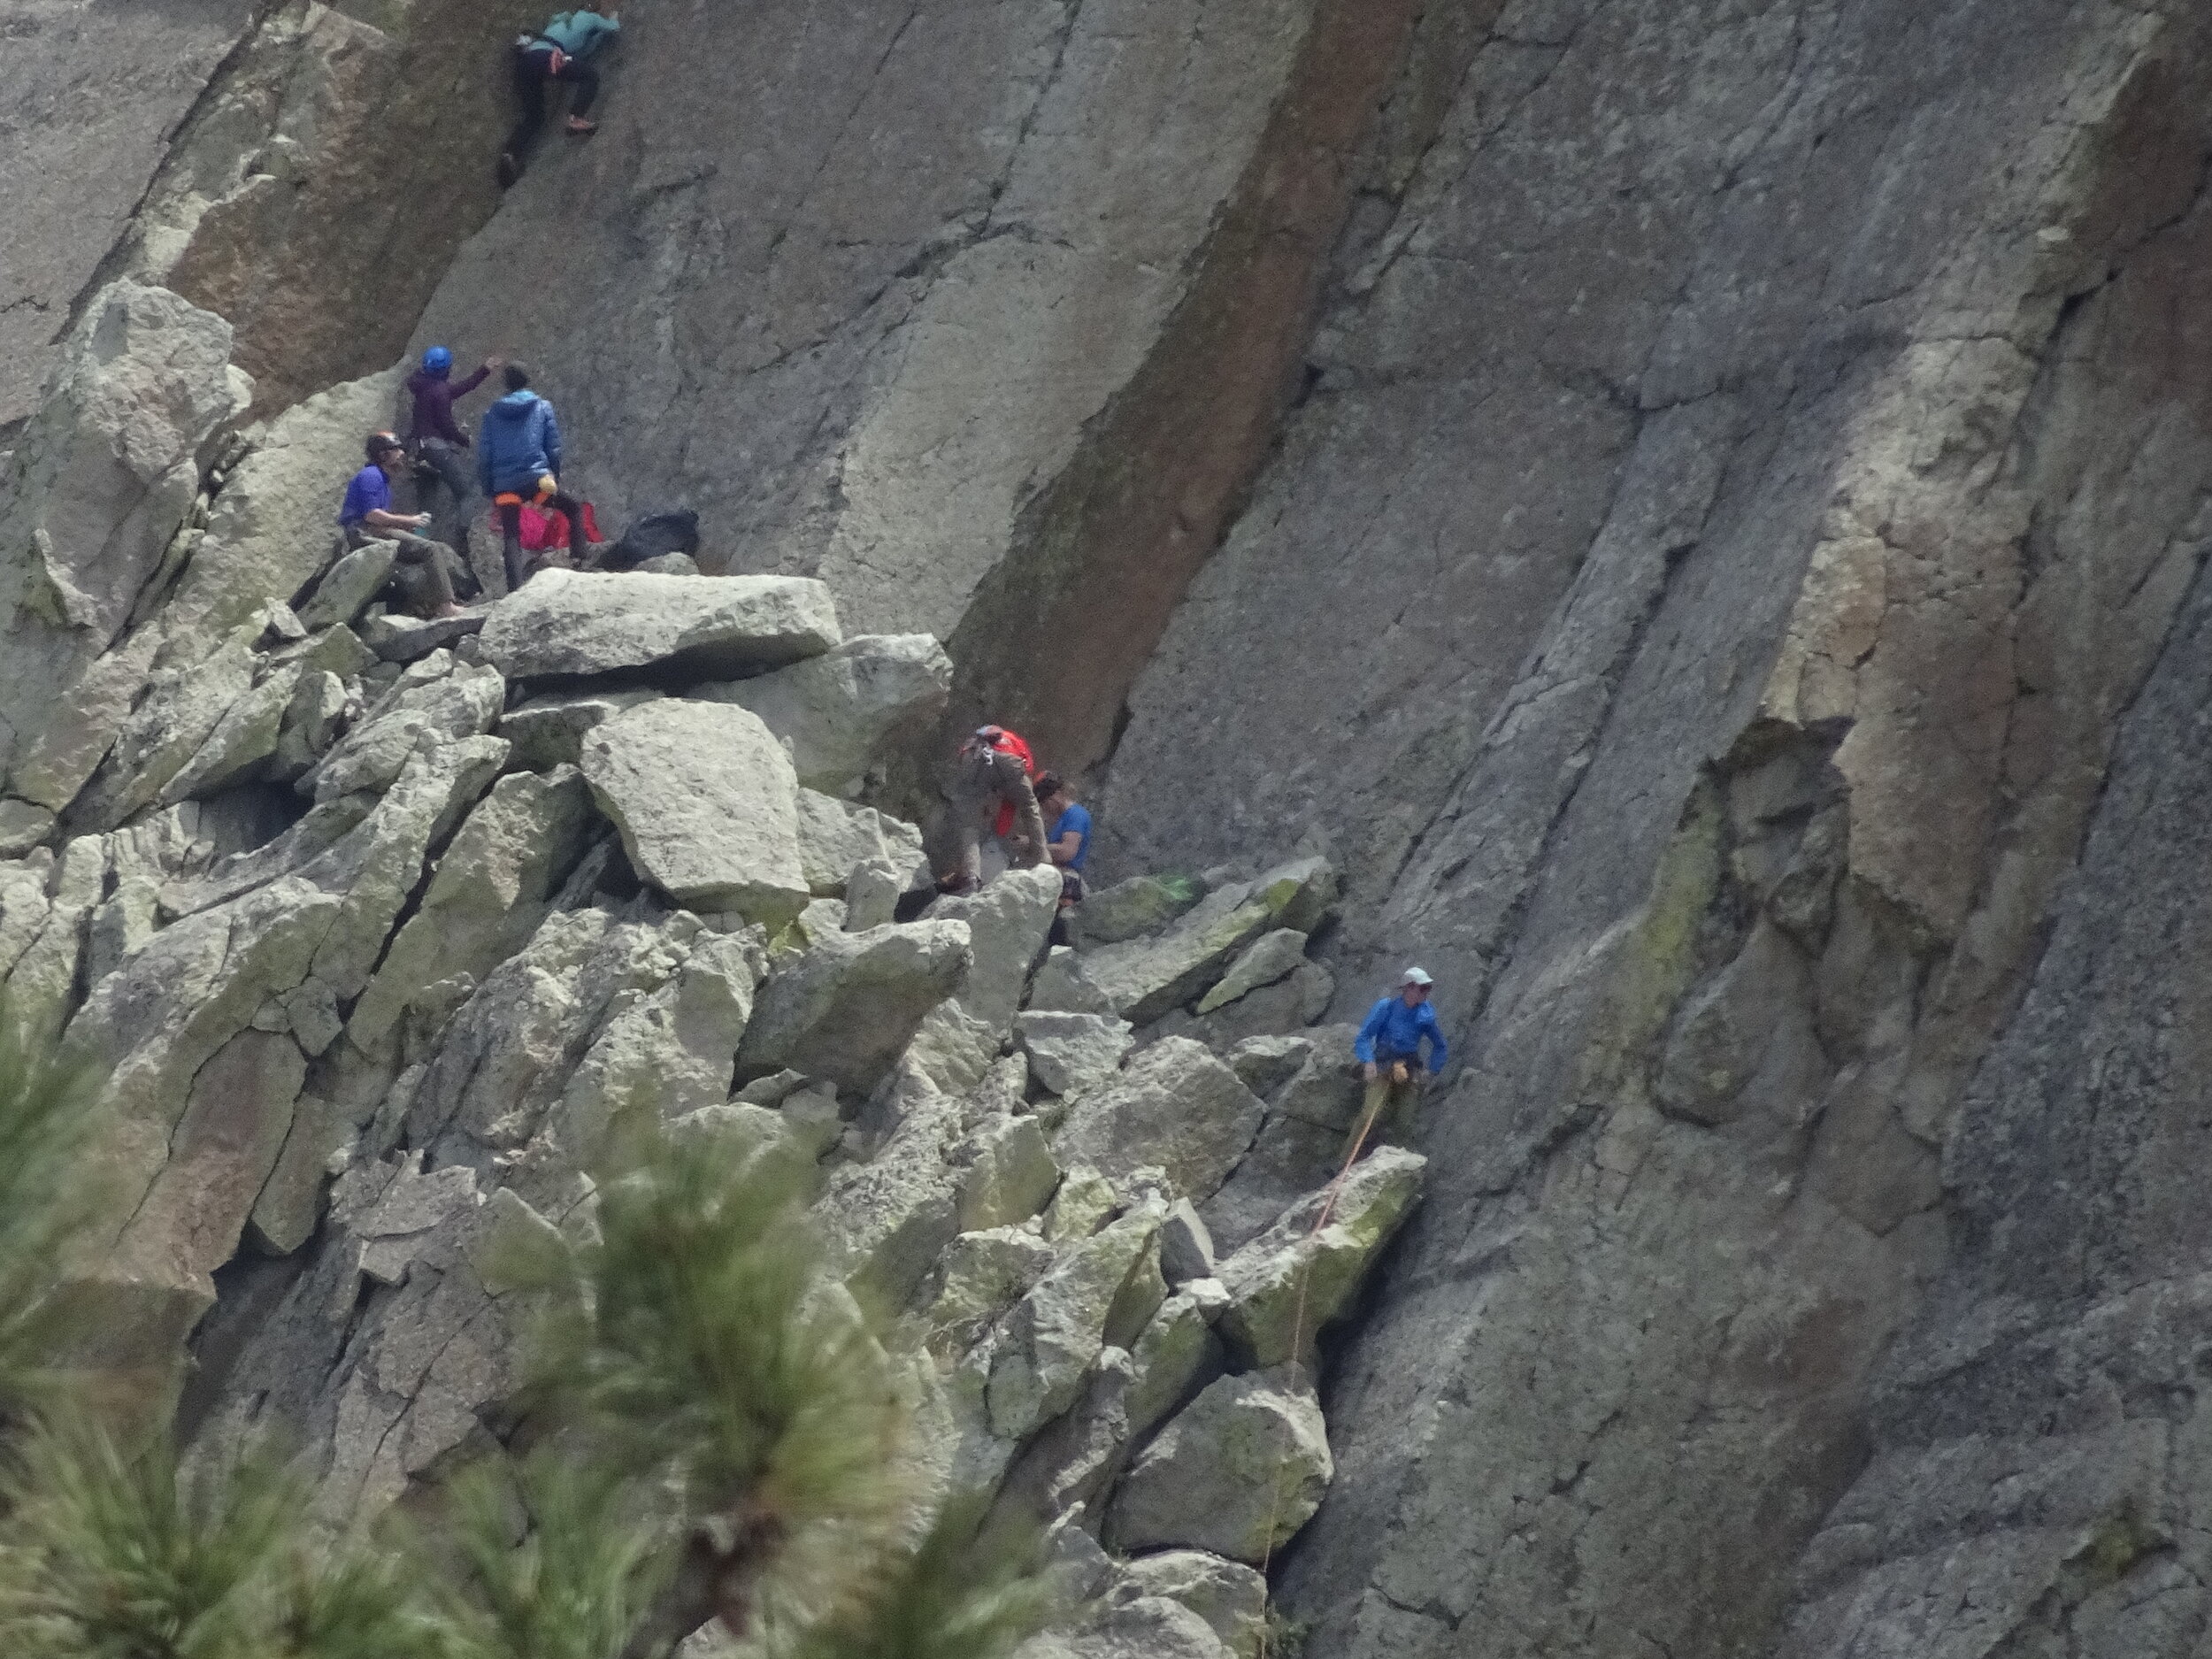 More mountain climbers spotted (zoomed in) on Devil’s Tower.  Photo by Karen Boudreaux, May 28, 2021